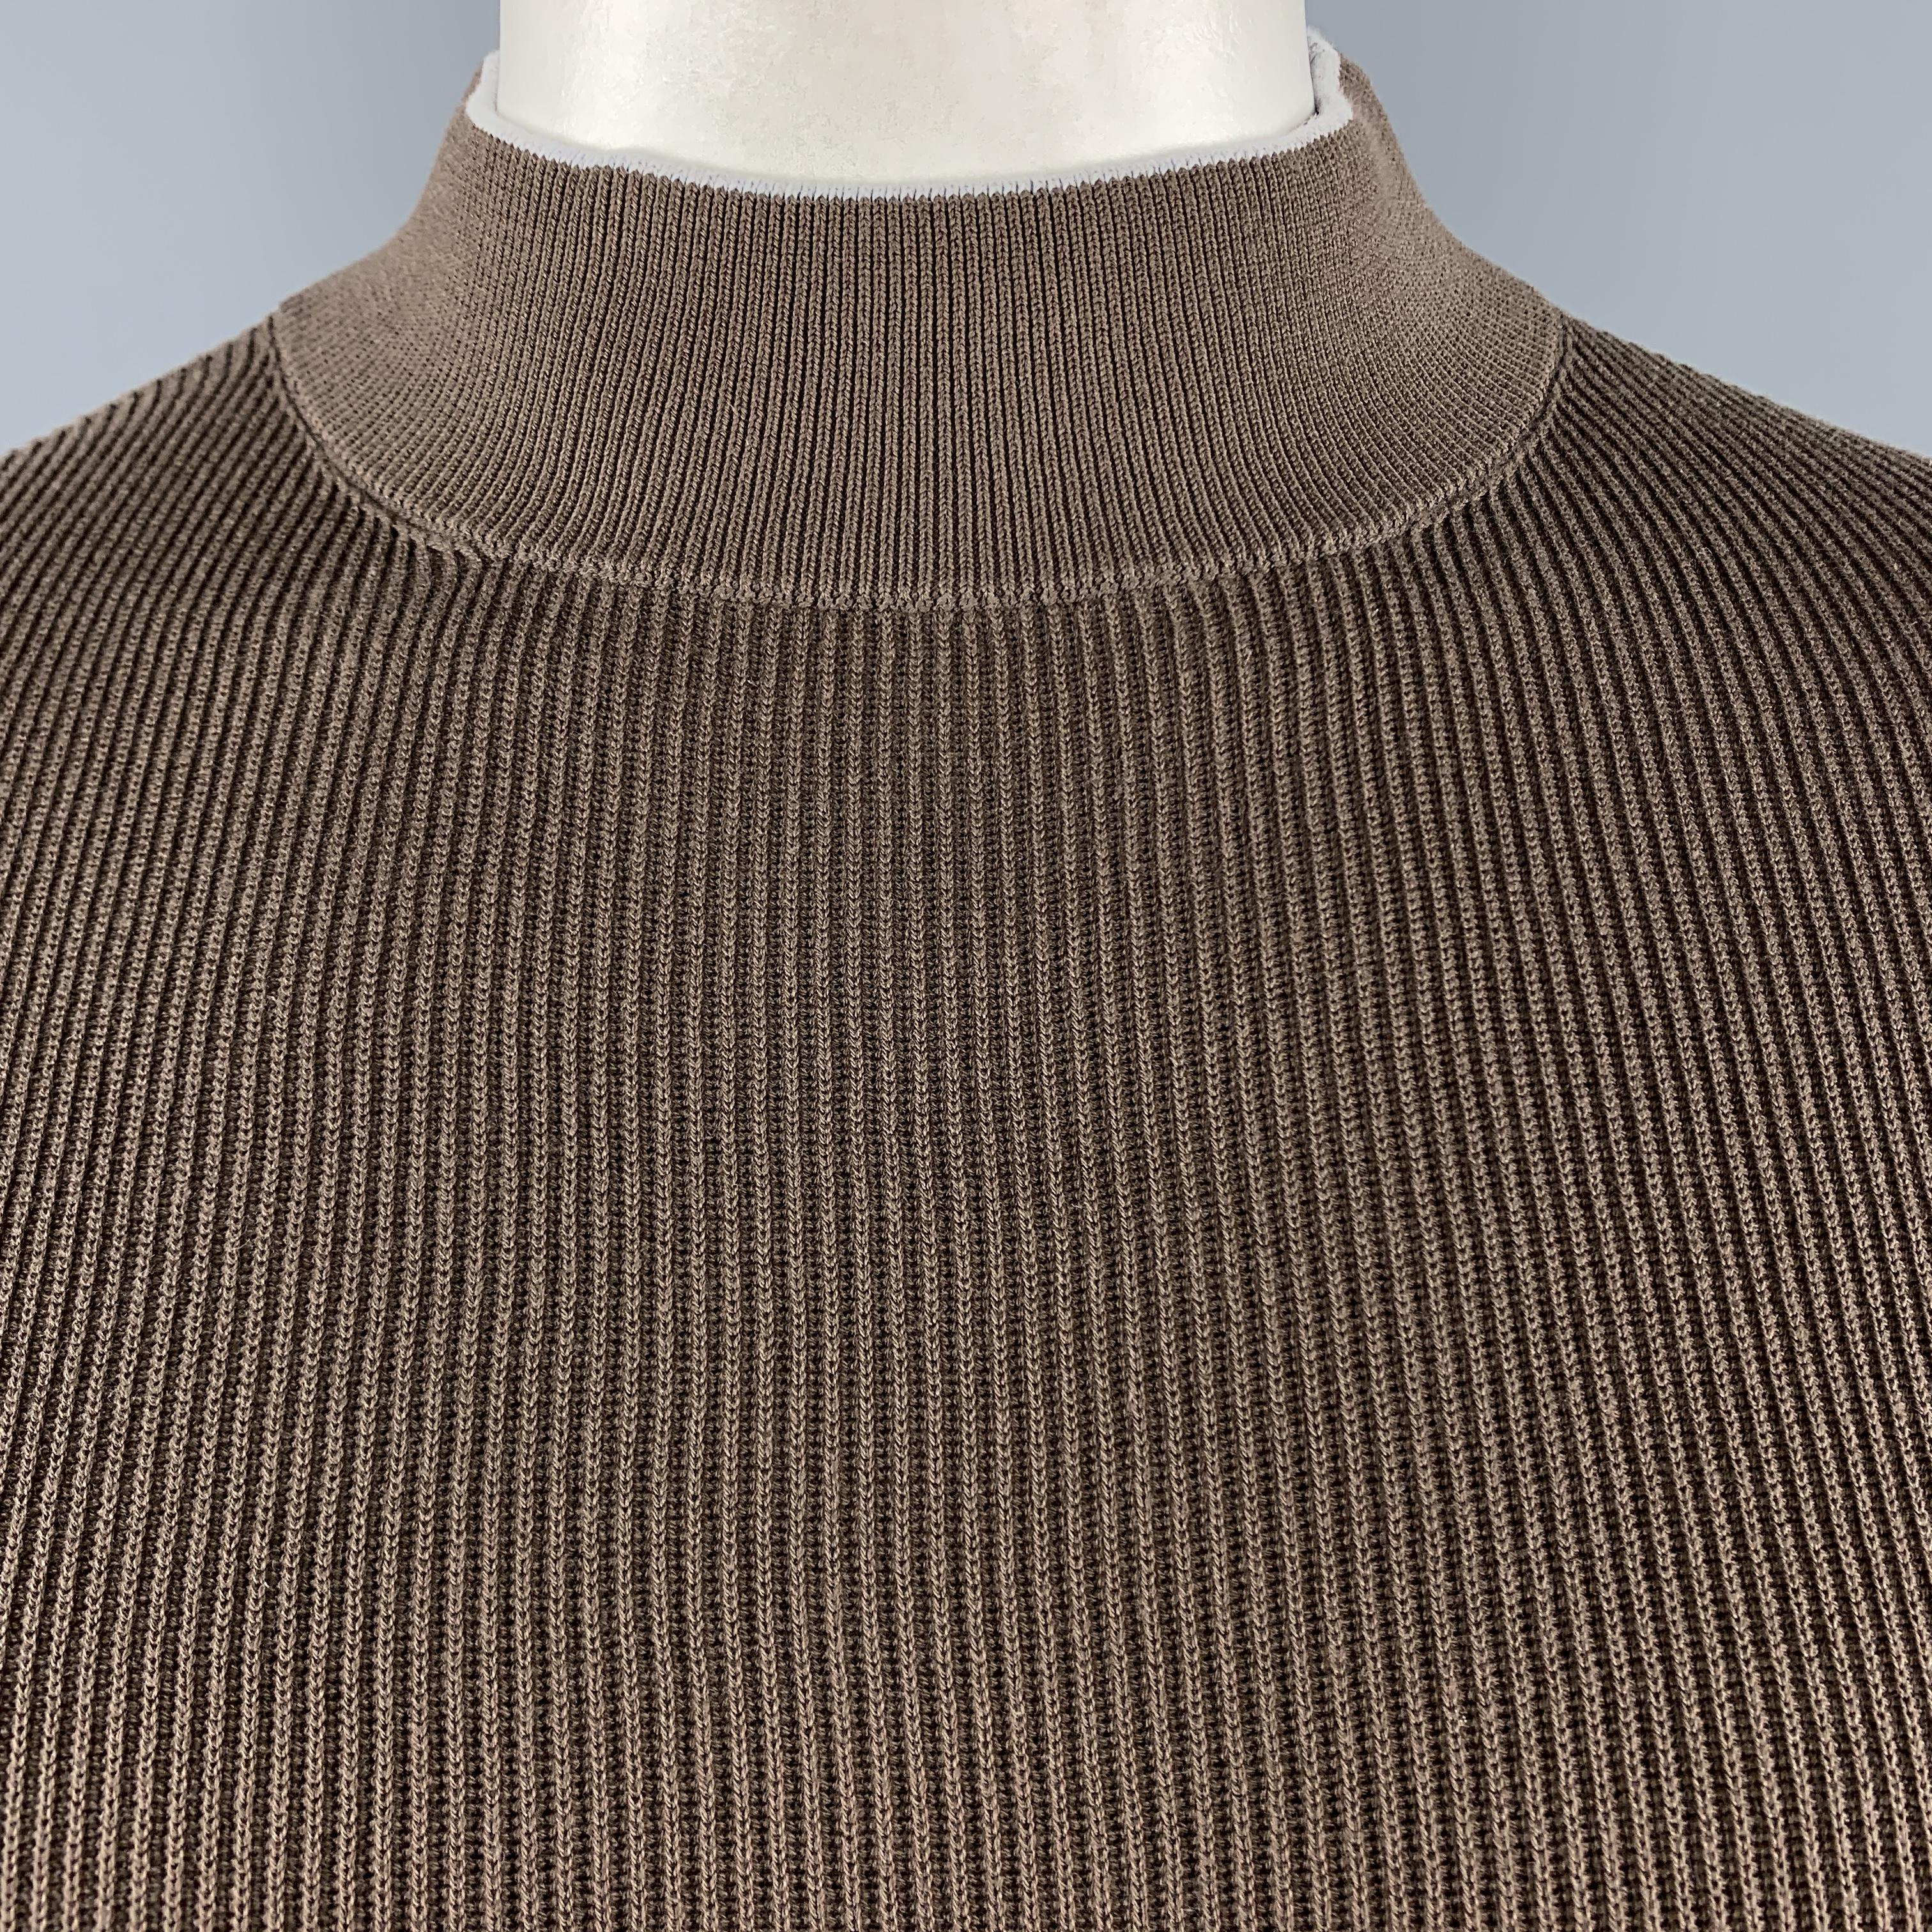 BRUNELLO CUCINELLI pullover comes in brown cotton ribbed knit with a high mock neck collar trimmed with a gray stripe. Made in Italy.

New with Tags. 
Marked: IT 54

Measurements:

Shoulder: 18 in.
Chest: 46 in.
Sleeve: 31 in.
Length: 32 in. 